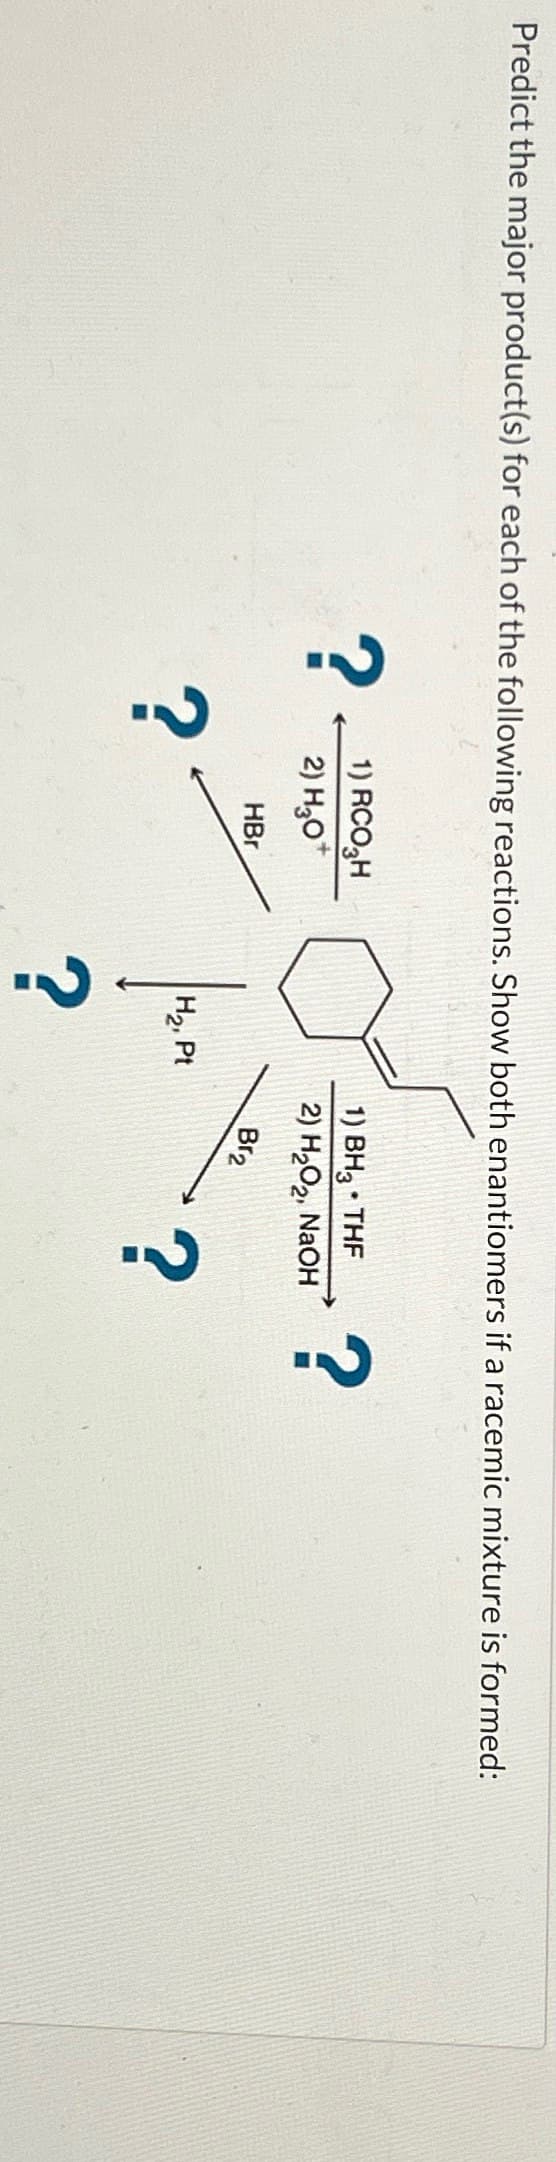 Predict the major product(s) for each of the following reactions. Show both enantiomers if a racemic mixture is formed:
?
?
1) RCO₂H
2) H3O+
HBr
1) BH3⚫ THF
2) H2O2, NaOH
?
?
H2, Pt
Br2
?